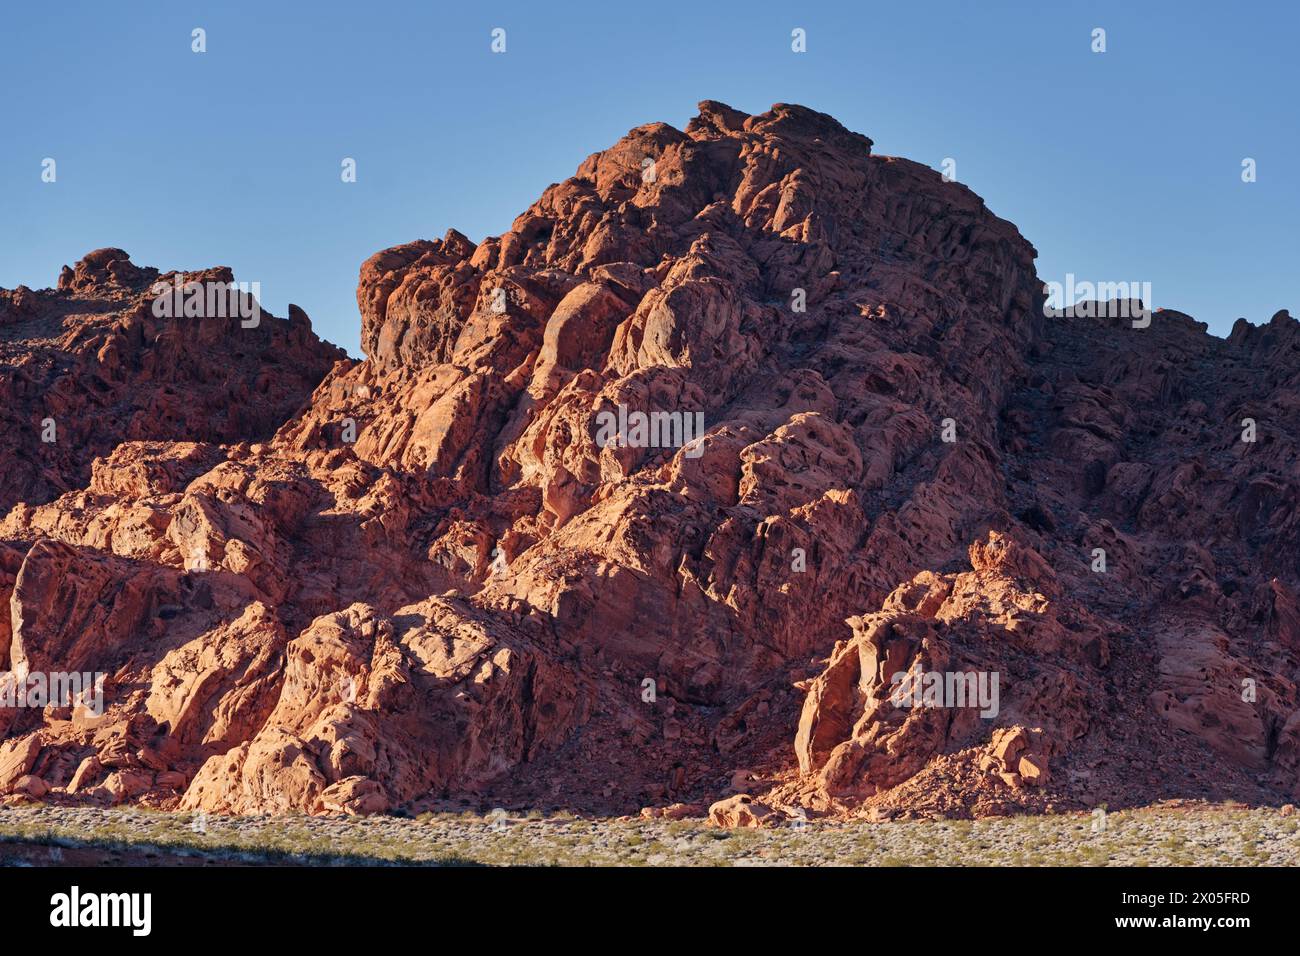 Der Red Baron Mountain im Valley of Fire State Park in Nevada Stockfoto